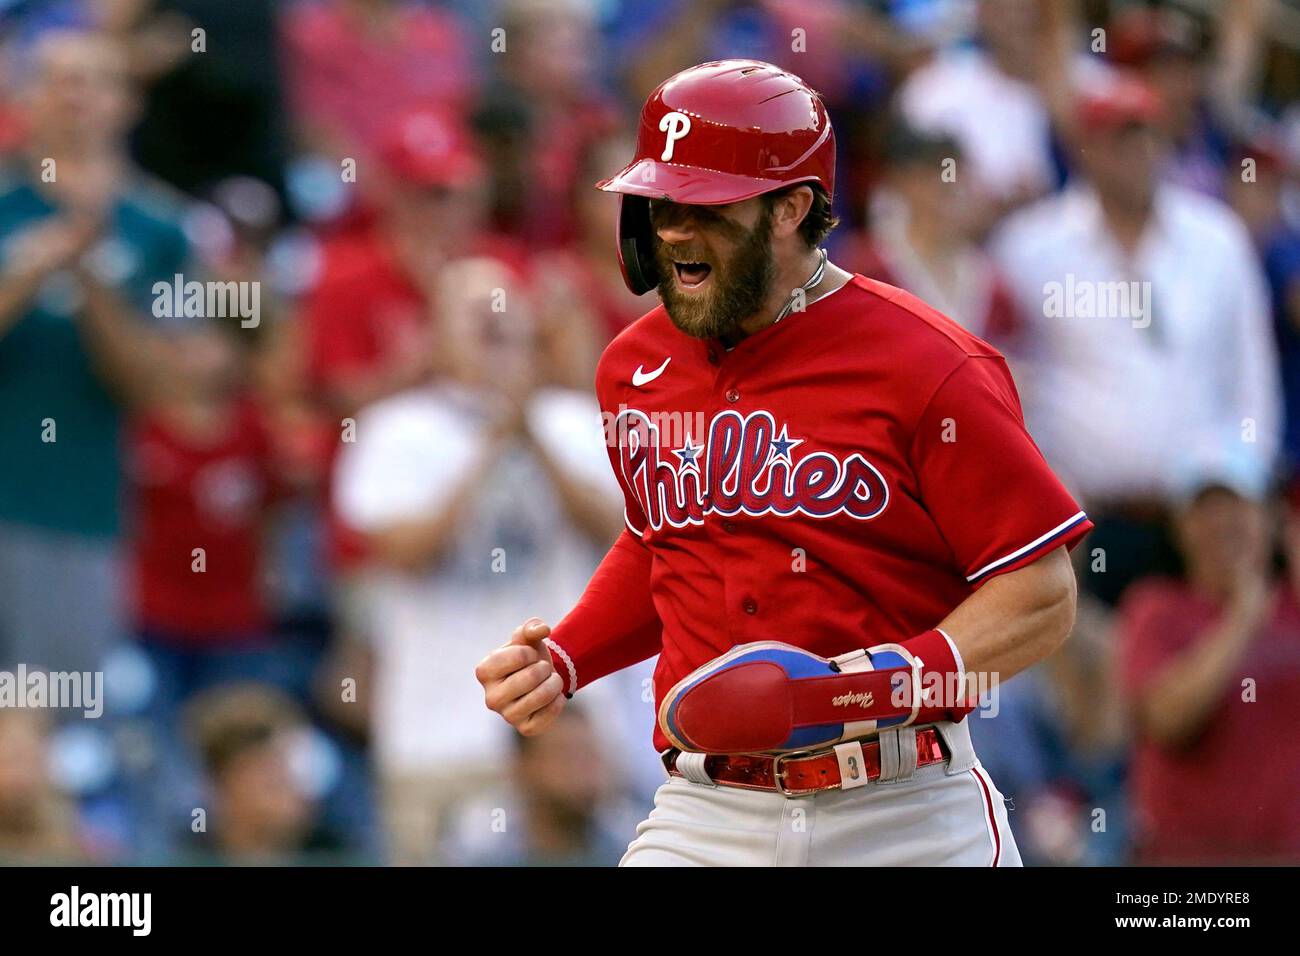 Philadelphia Phillies' Bryce Harper reacts as he scores on Rhys Hoskins'  double in the ninth inning of a baseball game against the Washington  Nationals, Thursday, Aug. 5, 2021, in Washington. Philadelphia won